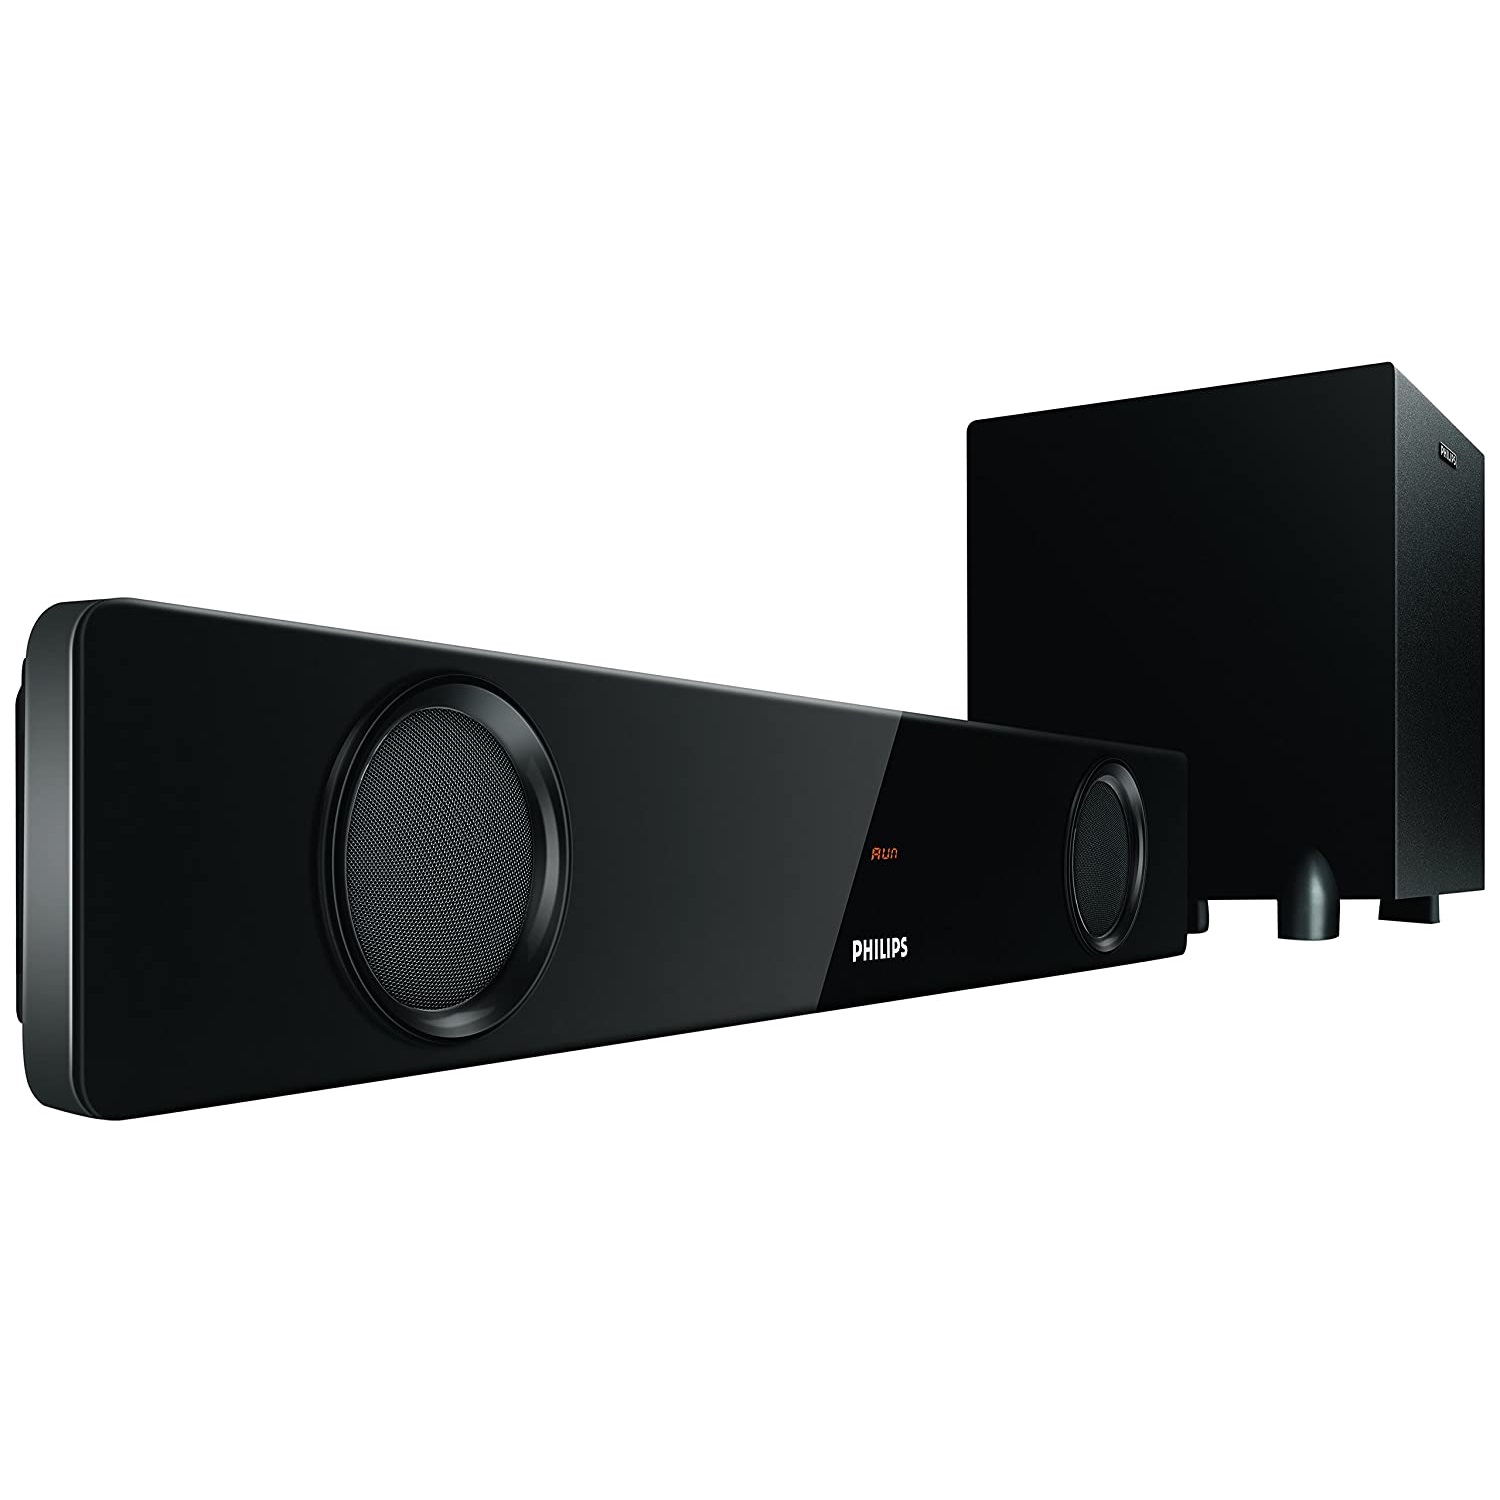 Philips HTL1041/94 Soundbar Speaker with Wireless Sub woofer in India